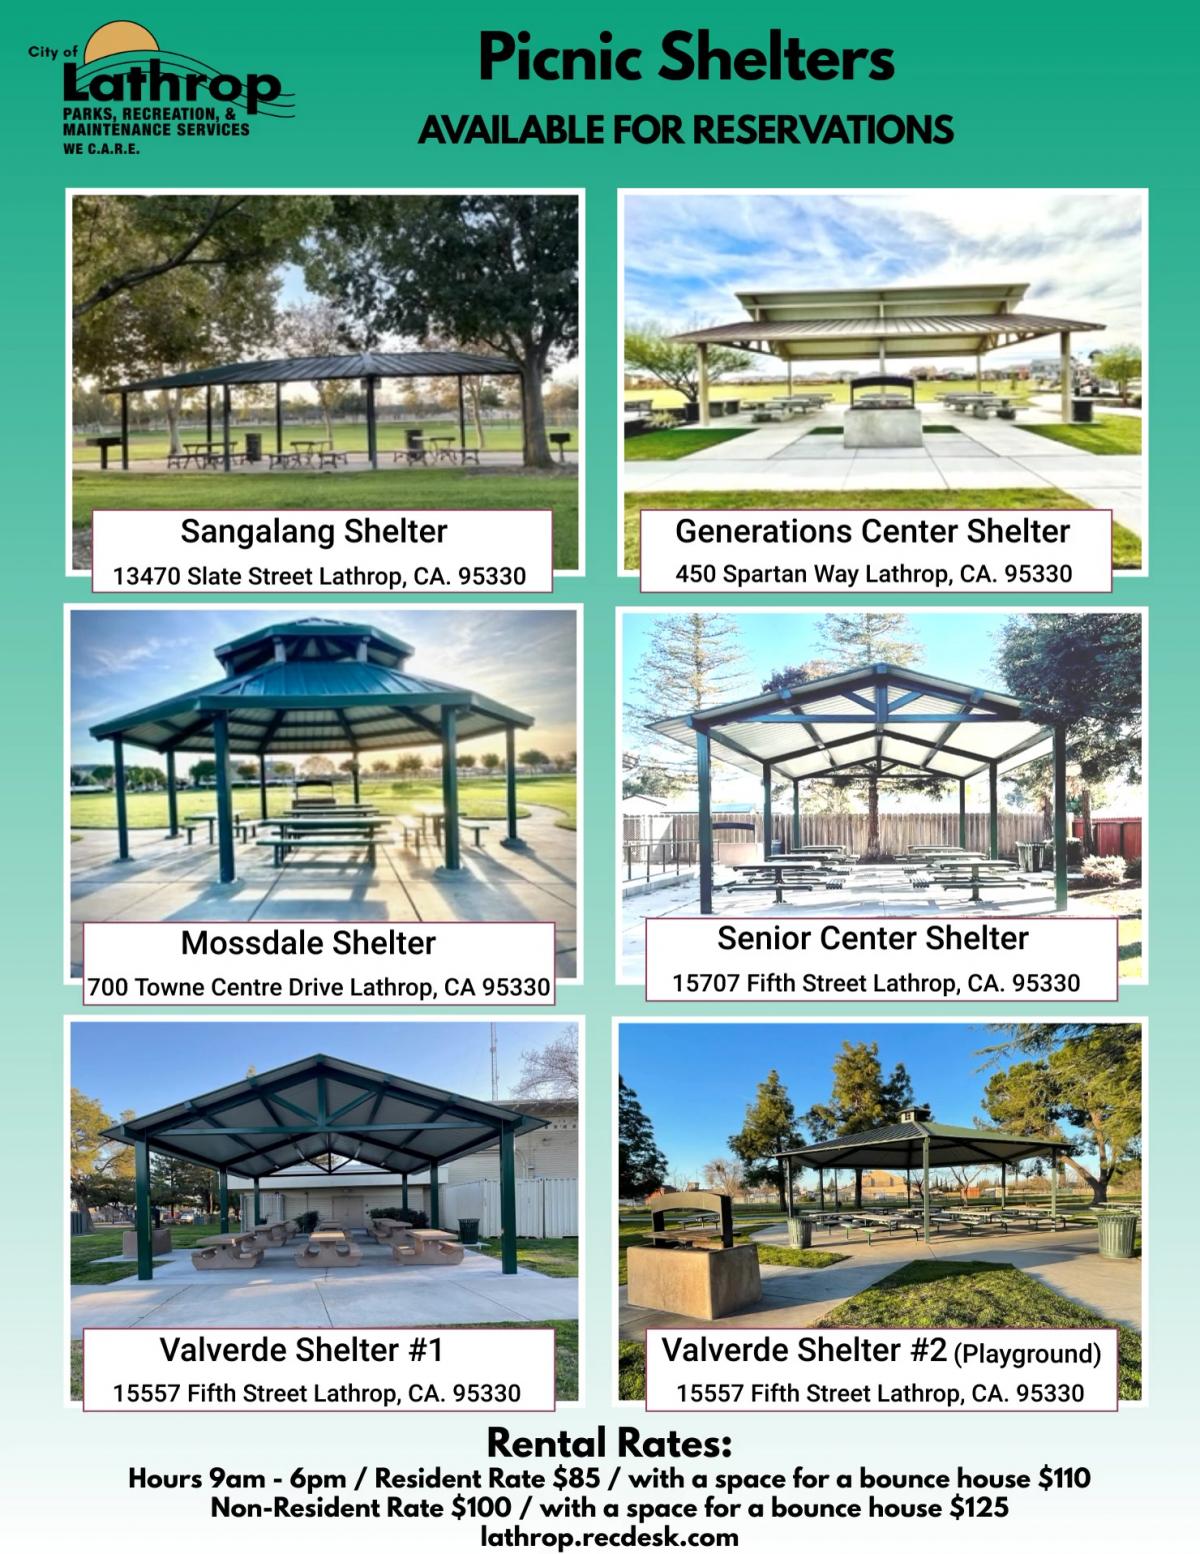 Available Picnic Shelters for rent with prices and addresses.